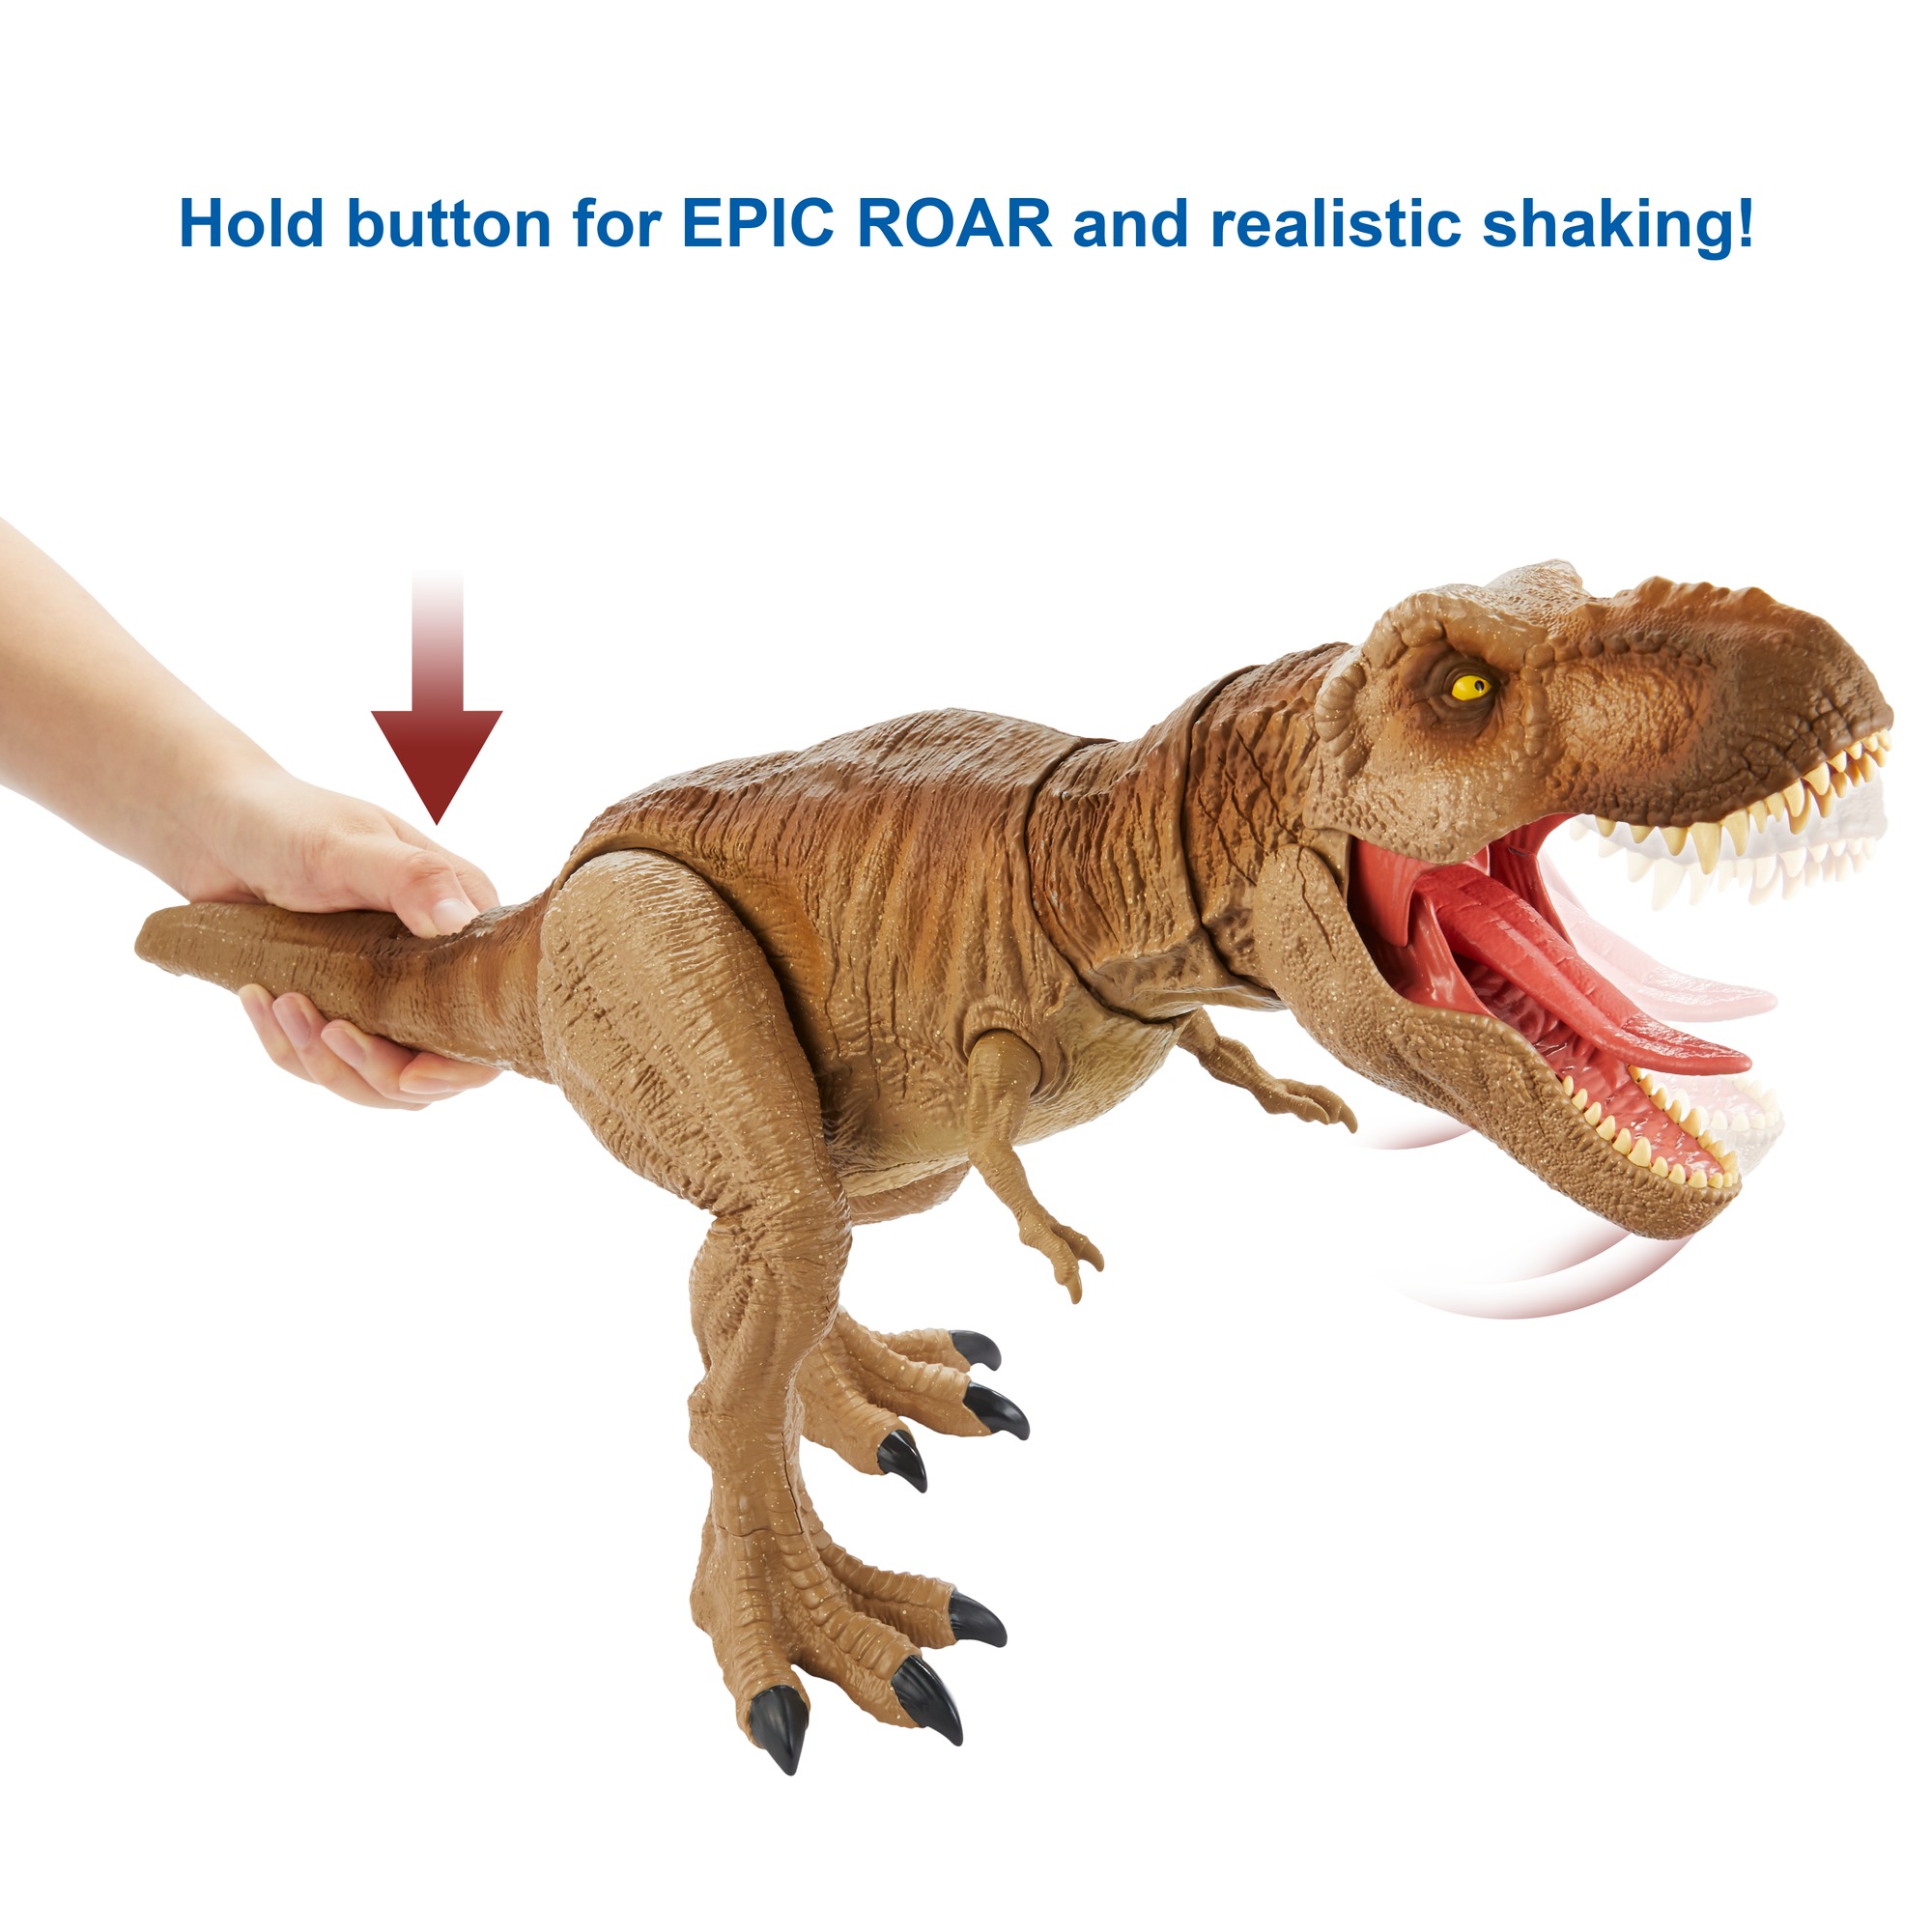 Jurassic World Camp Cretaceous Epic Roarin��� Tyrannosaurus Rex Large Action Figure, Primal Attack Feature, Sound, Realistic Shaking, Movable Joints; Ages 4 Years & Up - image 5 of 8